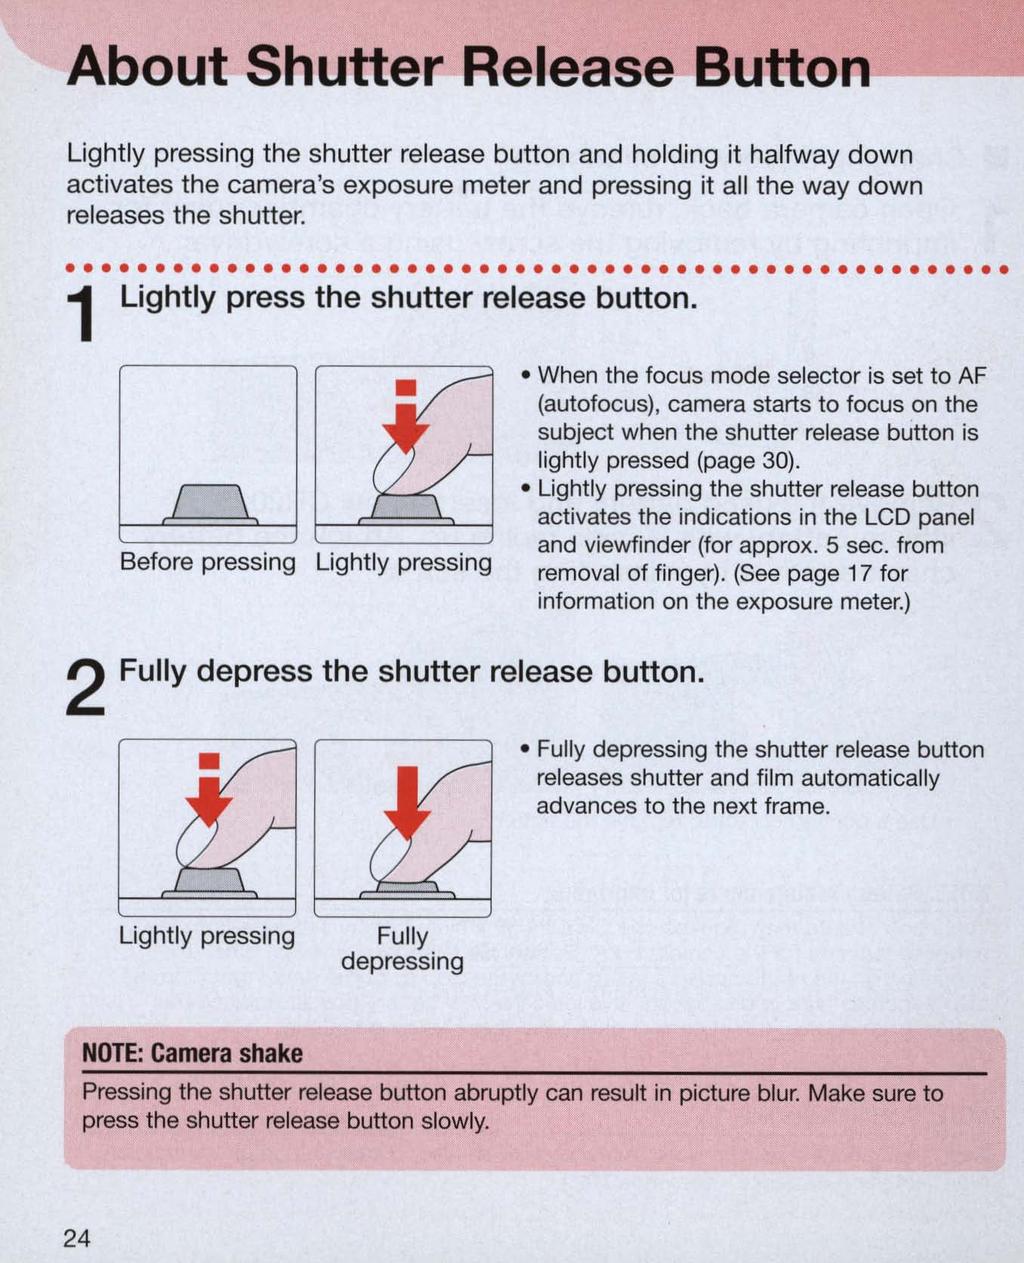 About Shutter Release Button~-- Lightly pressing the shutter release button and holding it halfway down activates the camera's exposure meter and pressing it all the way down releases the shutter.